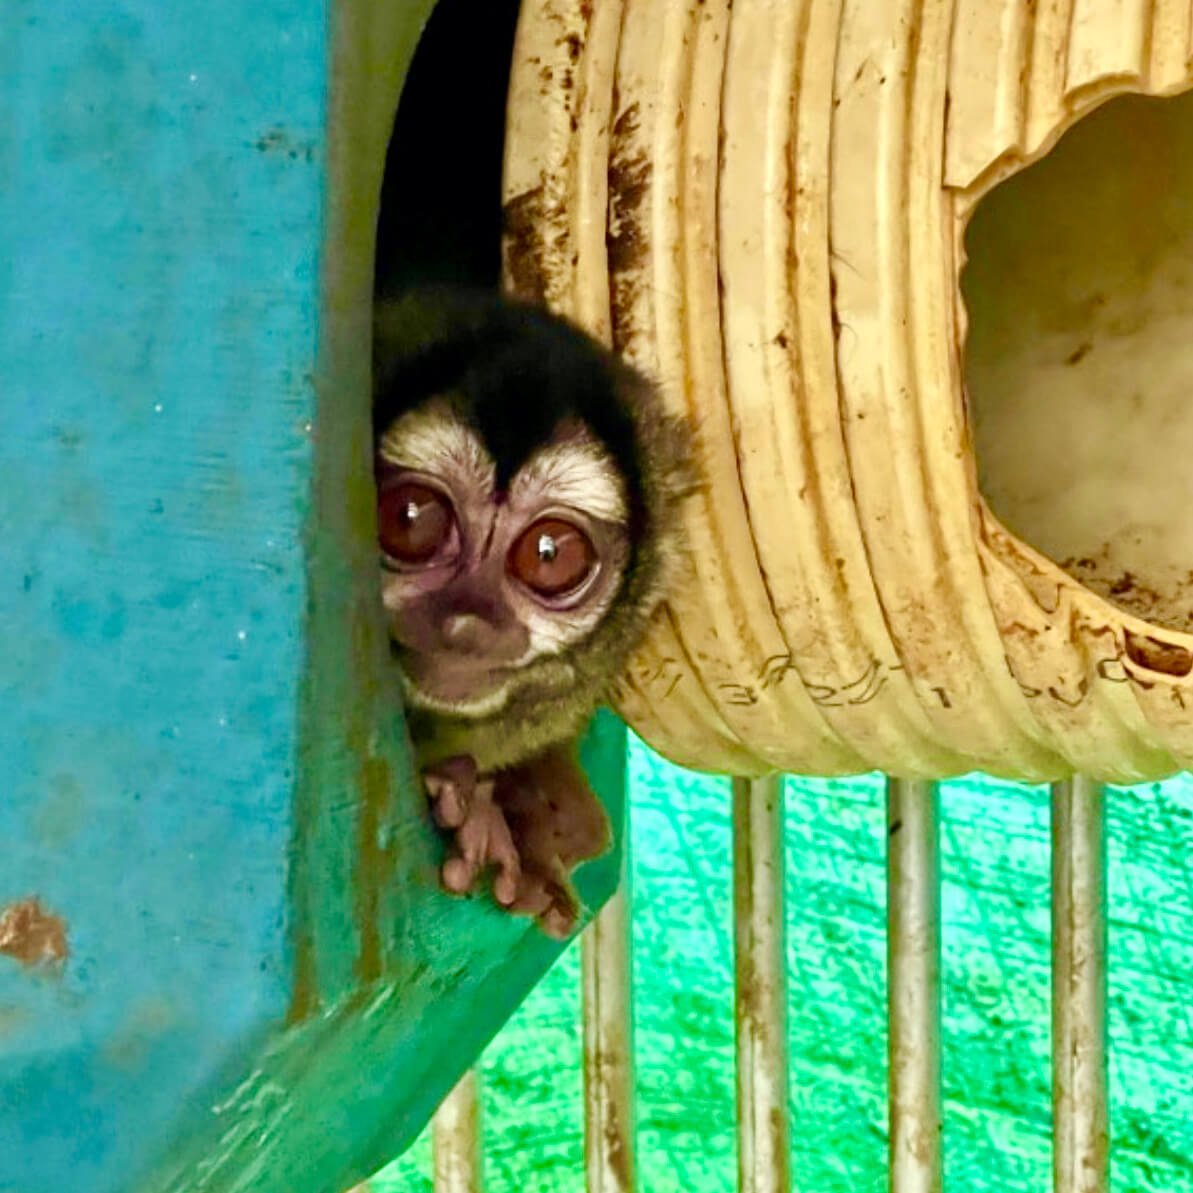 VIV Colombian Fundacion Centro de Primates FUCEP An Aotus monkey in a nest beside a soiled corrugated pipe also serving as a nest crop VS PO Harvard Still Funding Fraudulent Colombian Operation—Even After NIH Defunded It